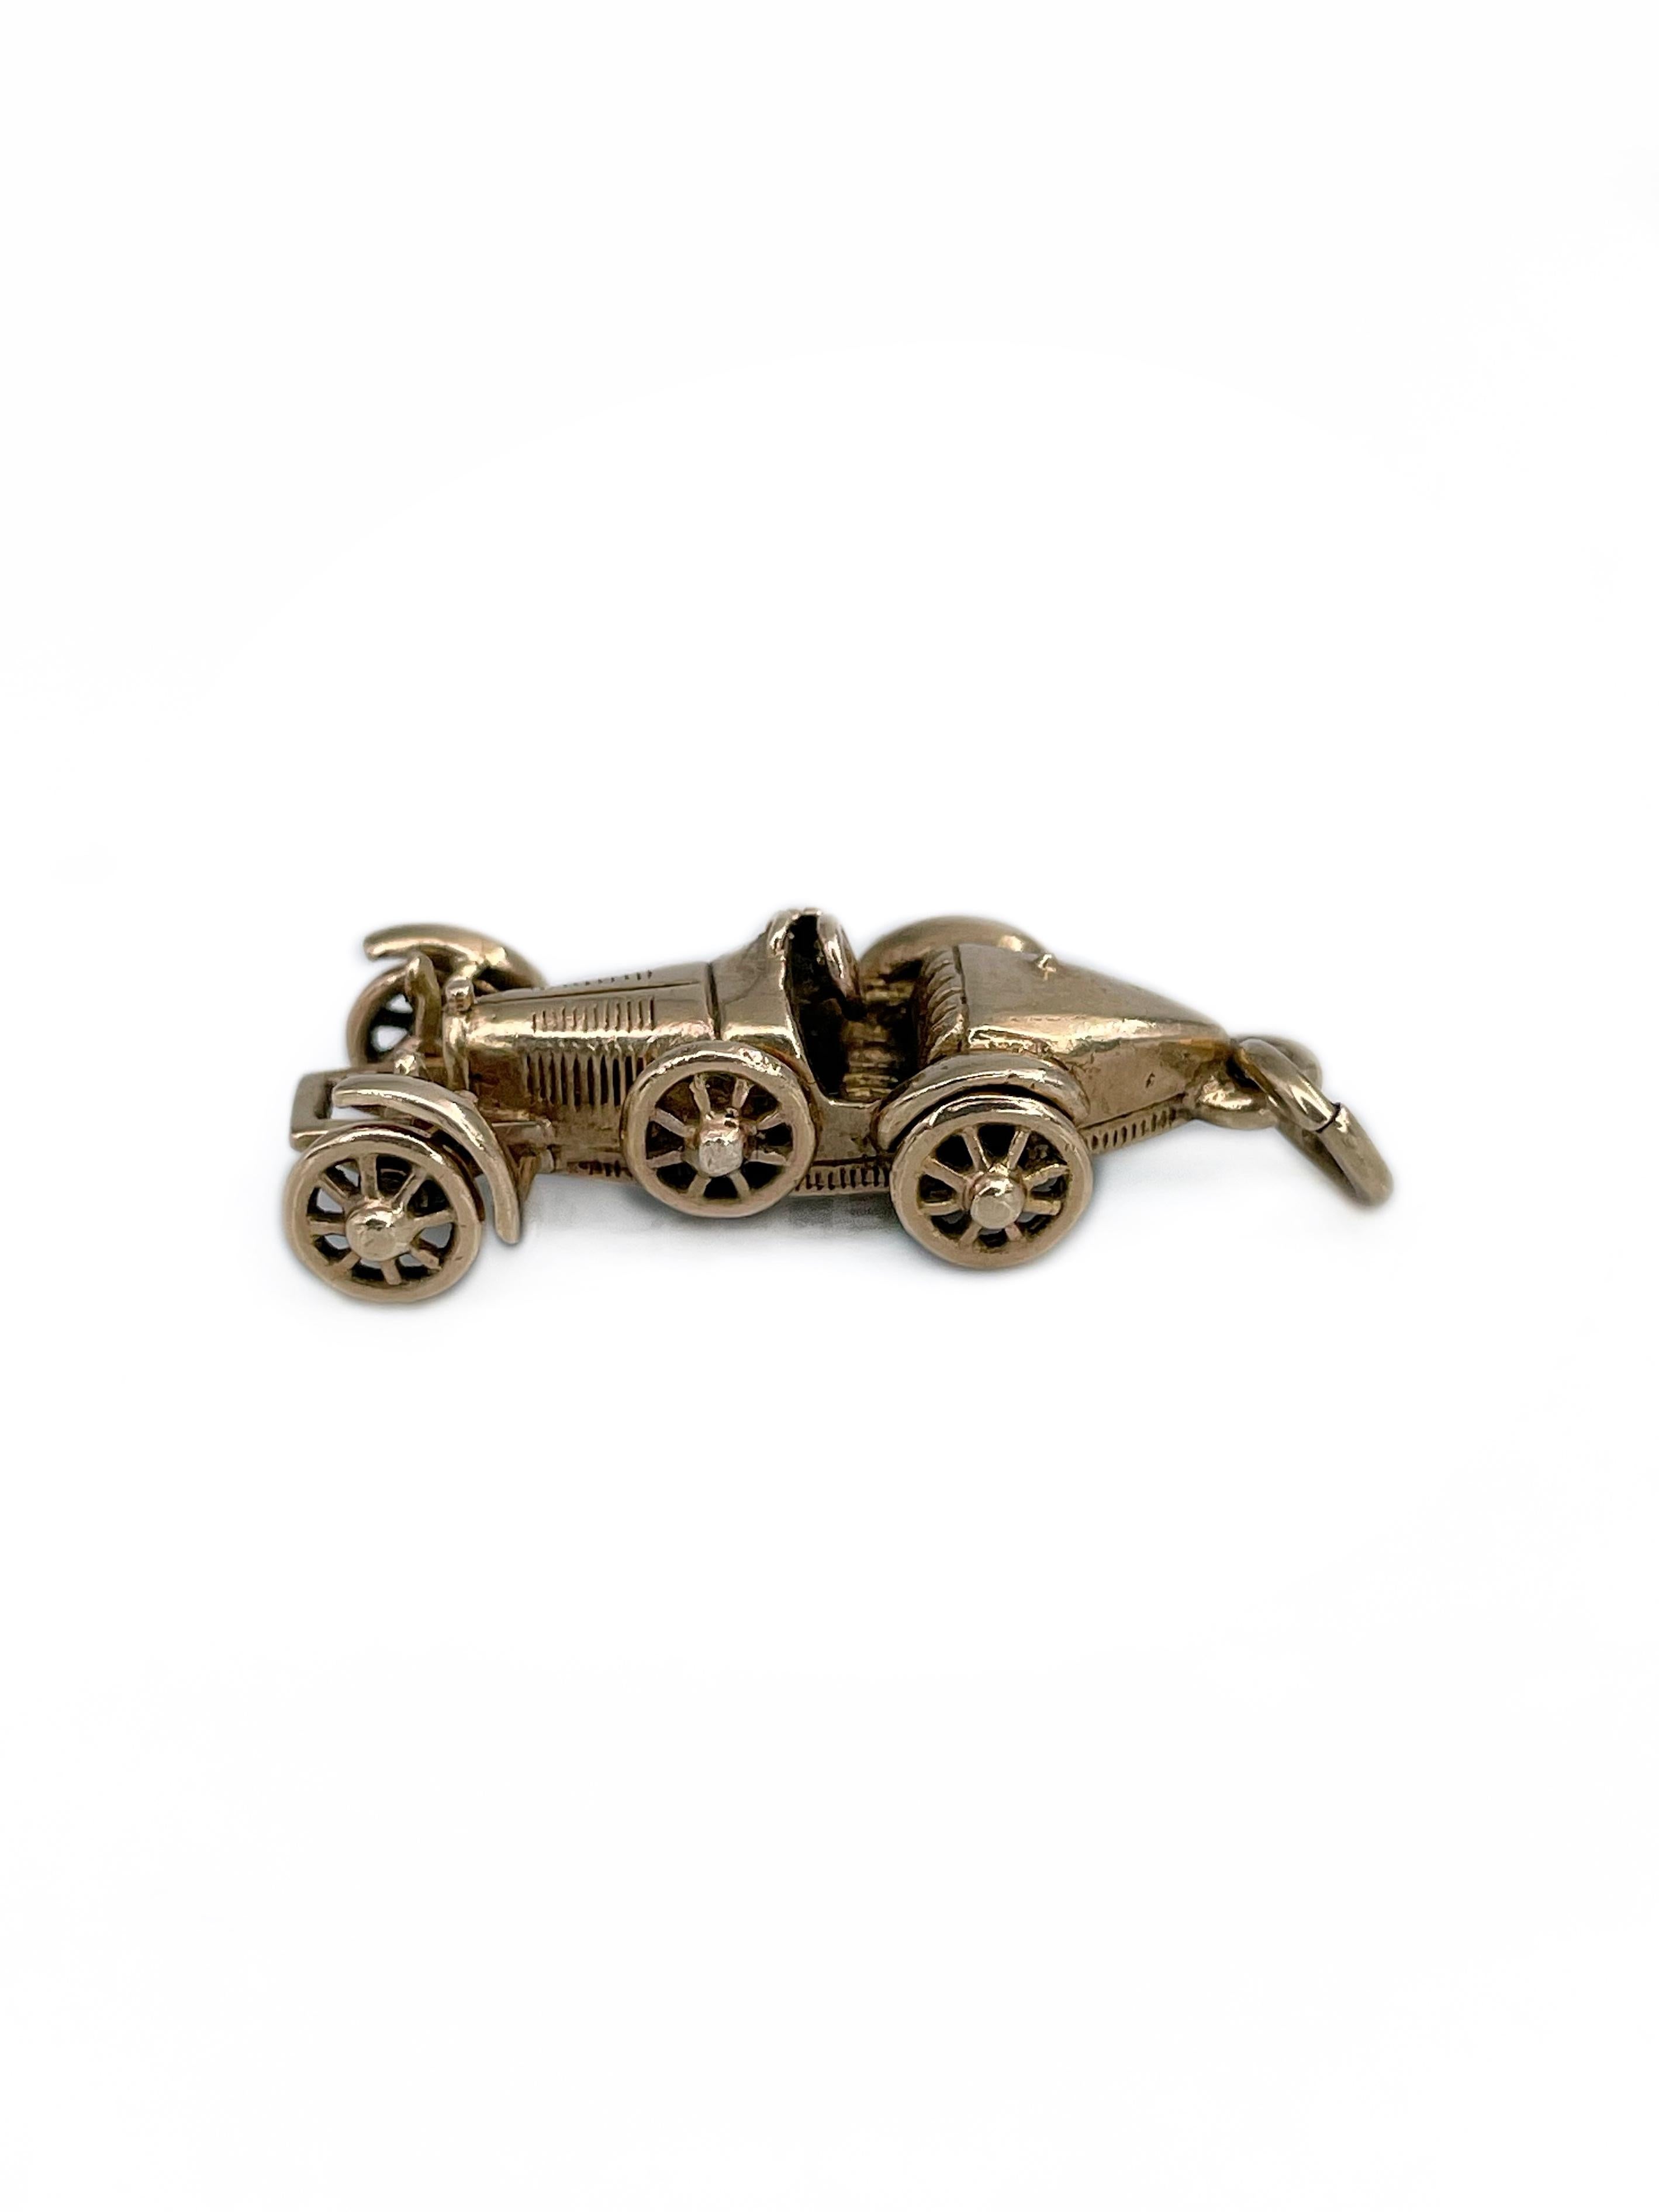 This is a car figure charm pendant crafted in 9K gold. Circa 1960. 

The piece is showcasing a detailed Bugatti Type 35 model. Main four wheels are moving (can be seen in a video). 

Collectable. 

Signed: “Bugatti Type 35 E&H REGD PATT 375”

Size: